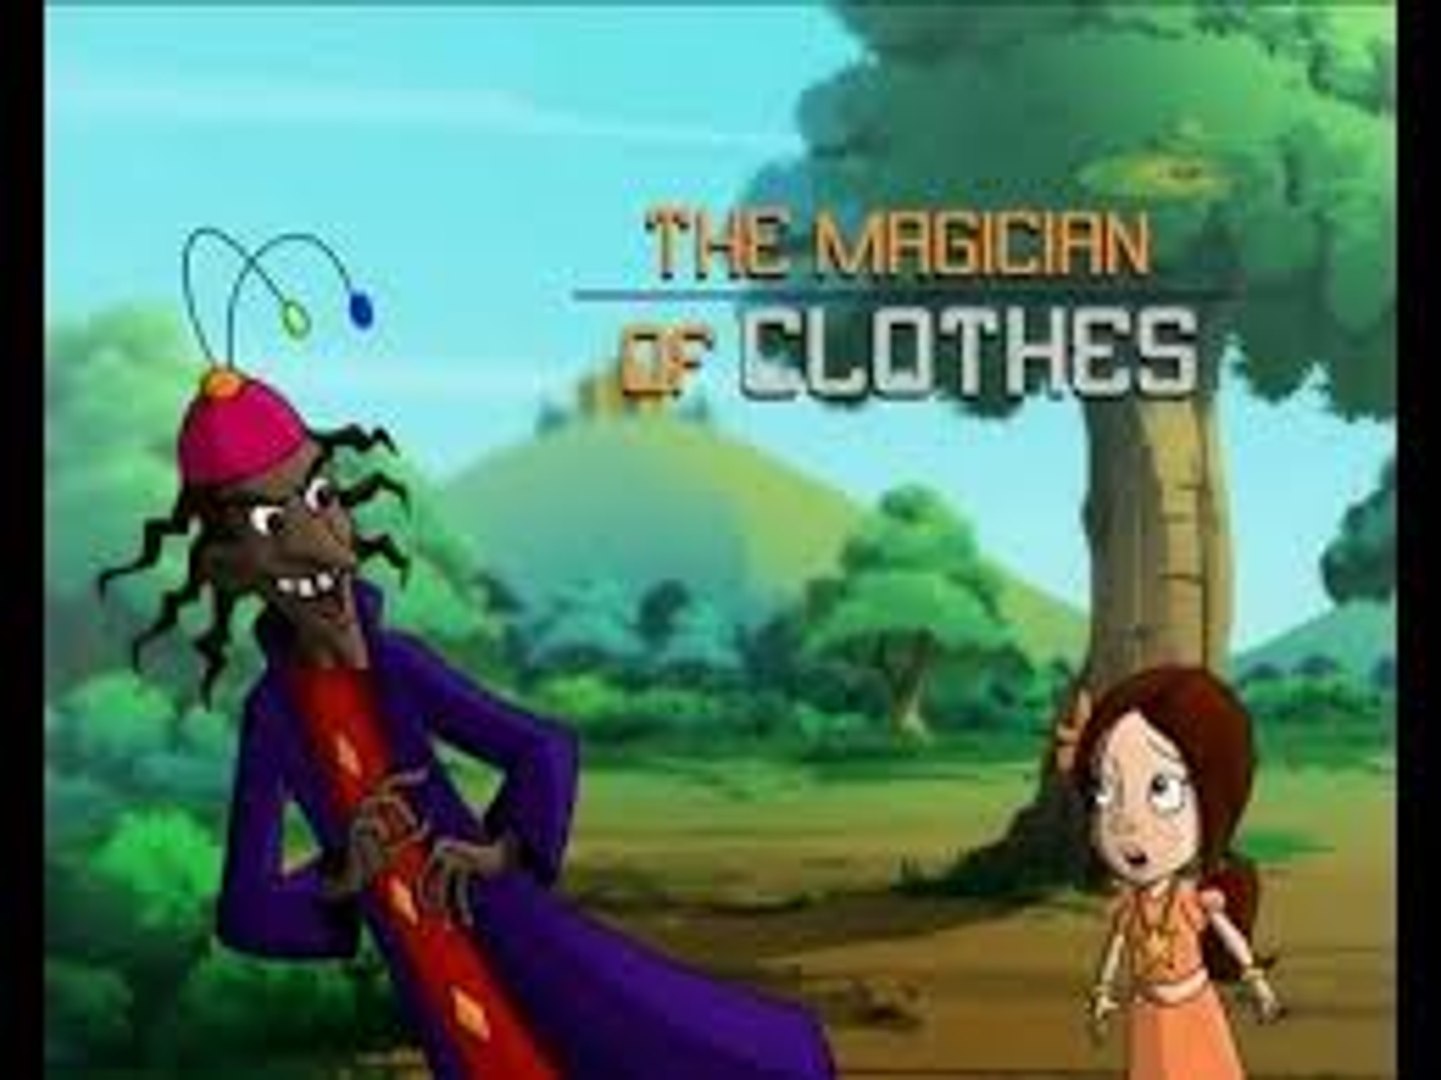 chota bheem magician of clothes episode - video Dailymotion